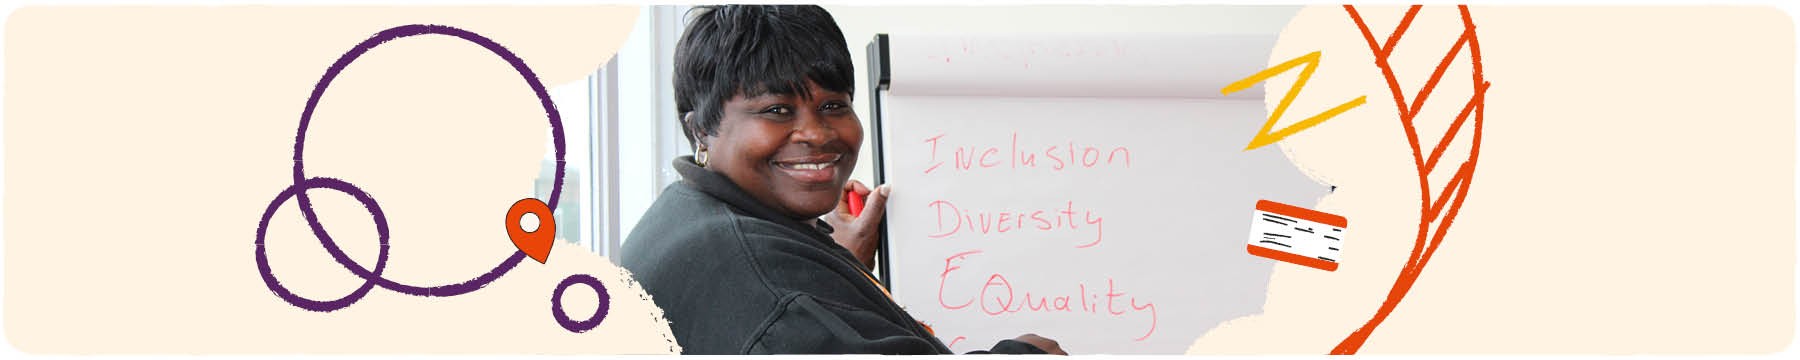 Black woman smiling in diversity and inclusion meeting.